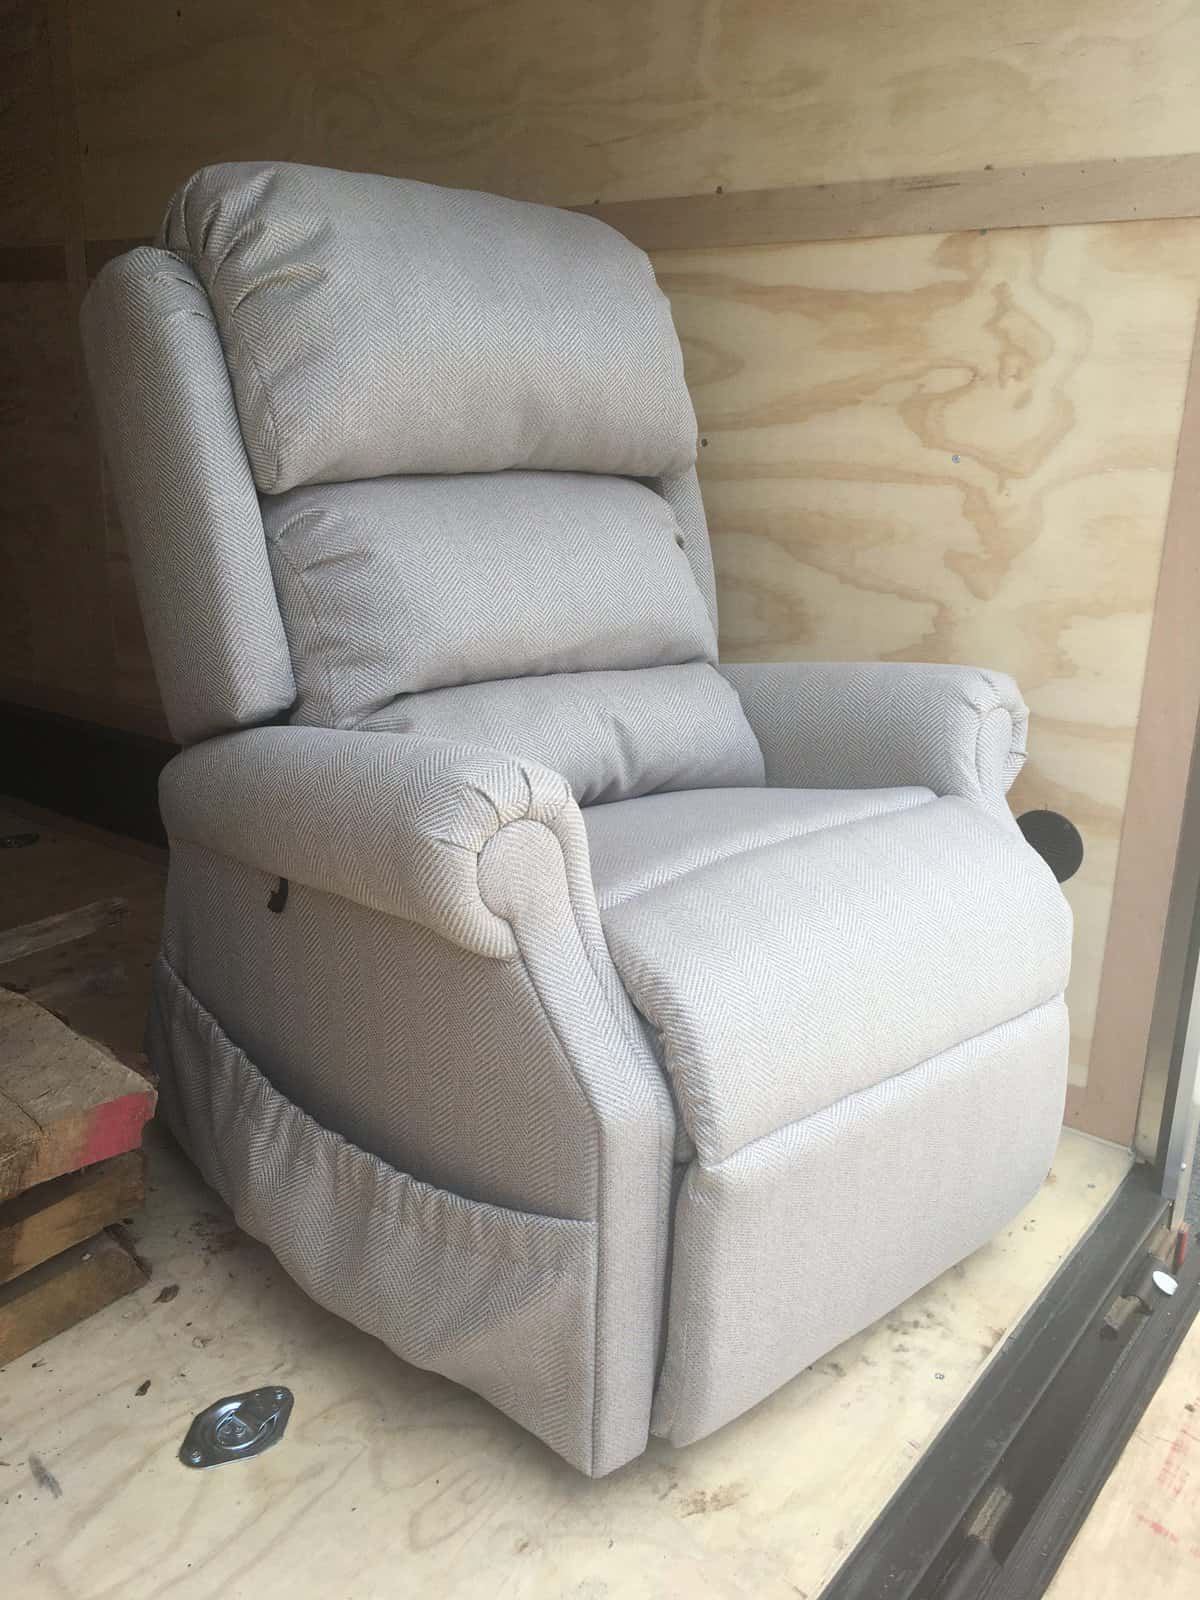 Recovered Recliner